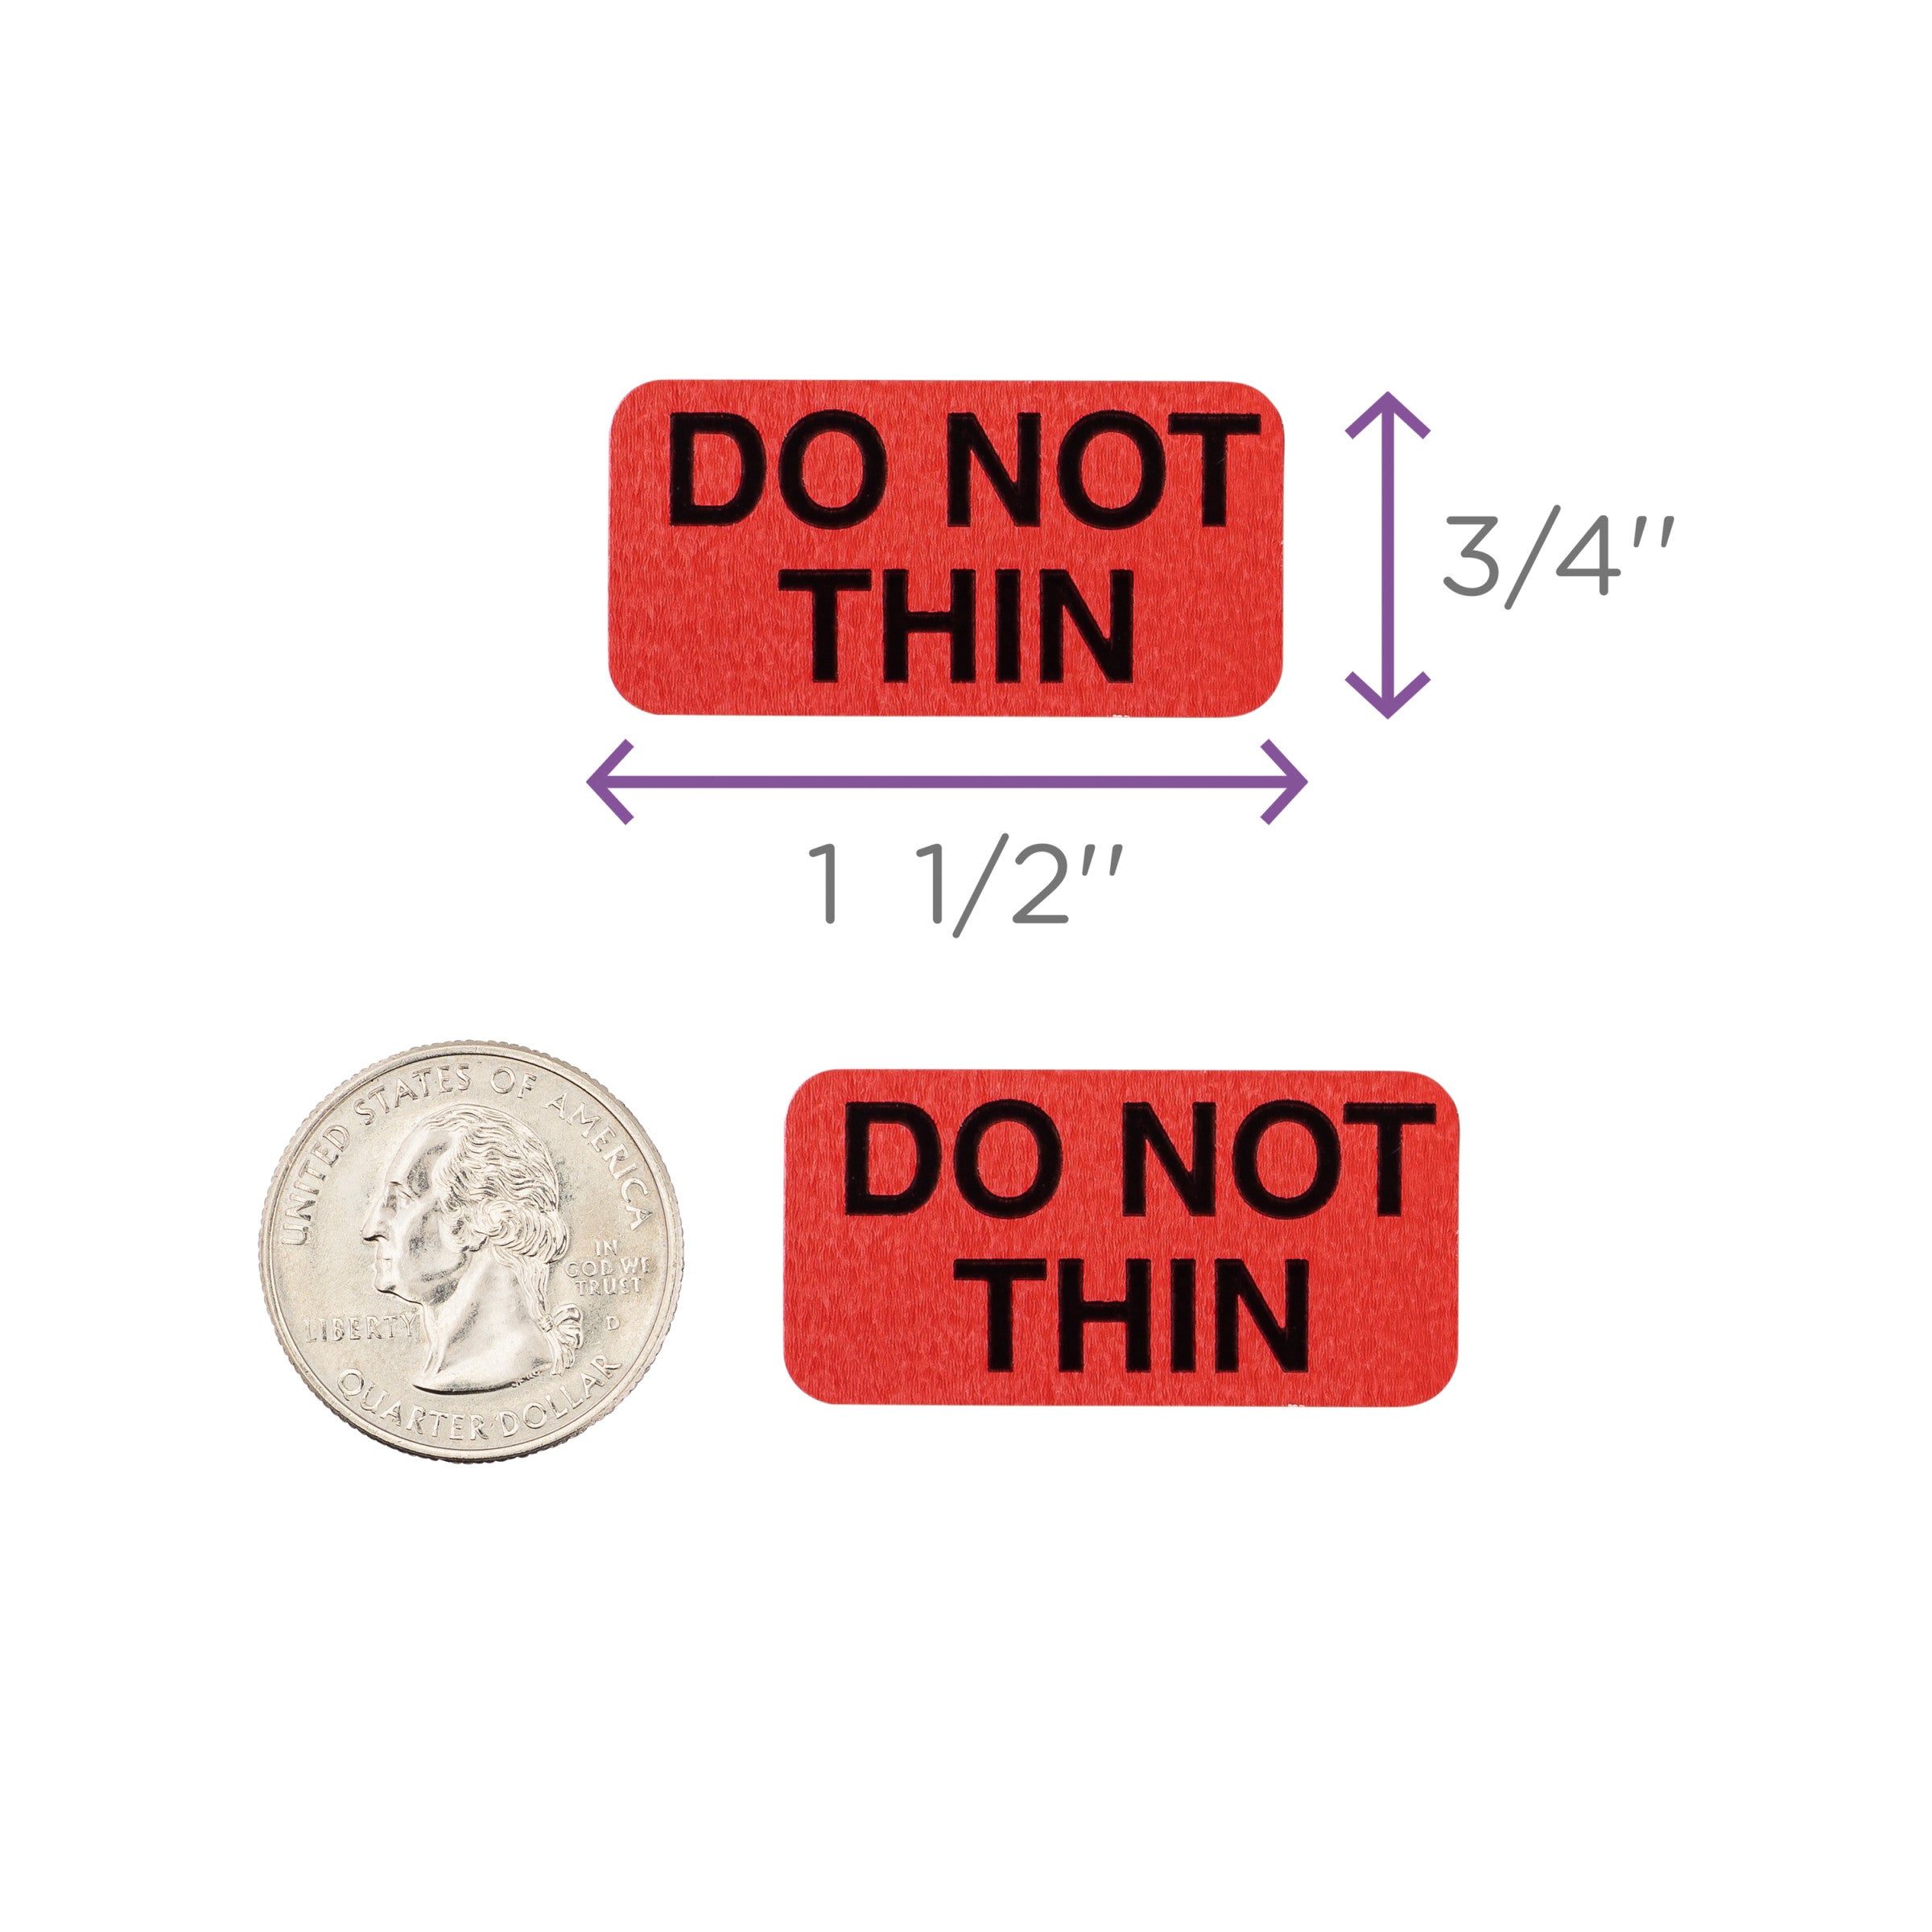 Do Not Thin Alert and Instruction Labels, Red, W1.5" x H.75" (Roll of 100)